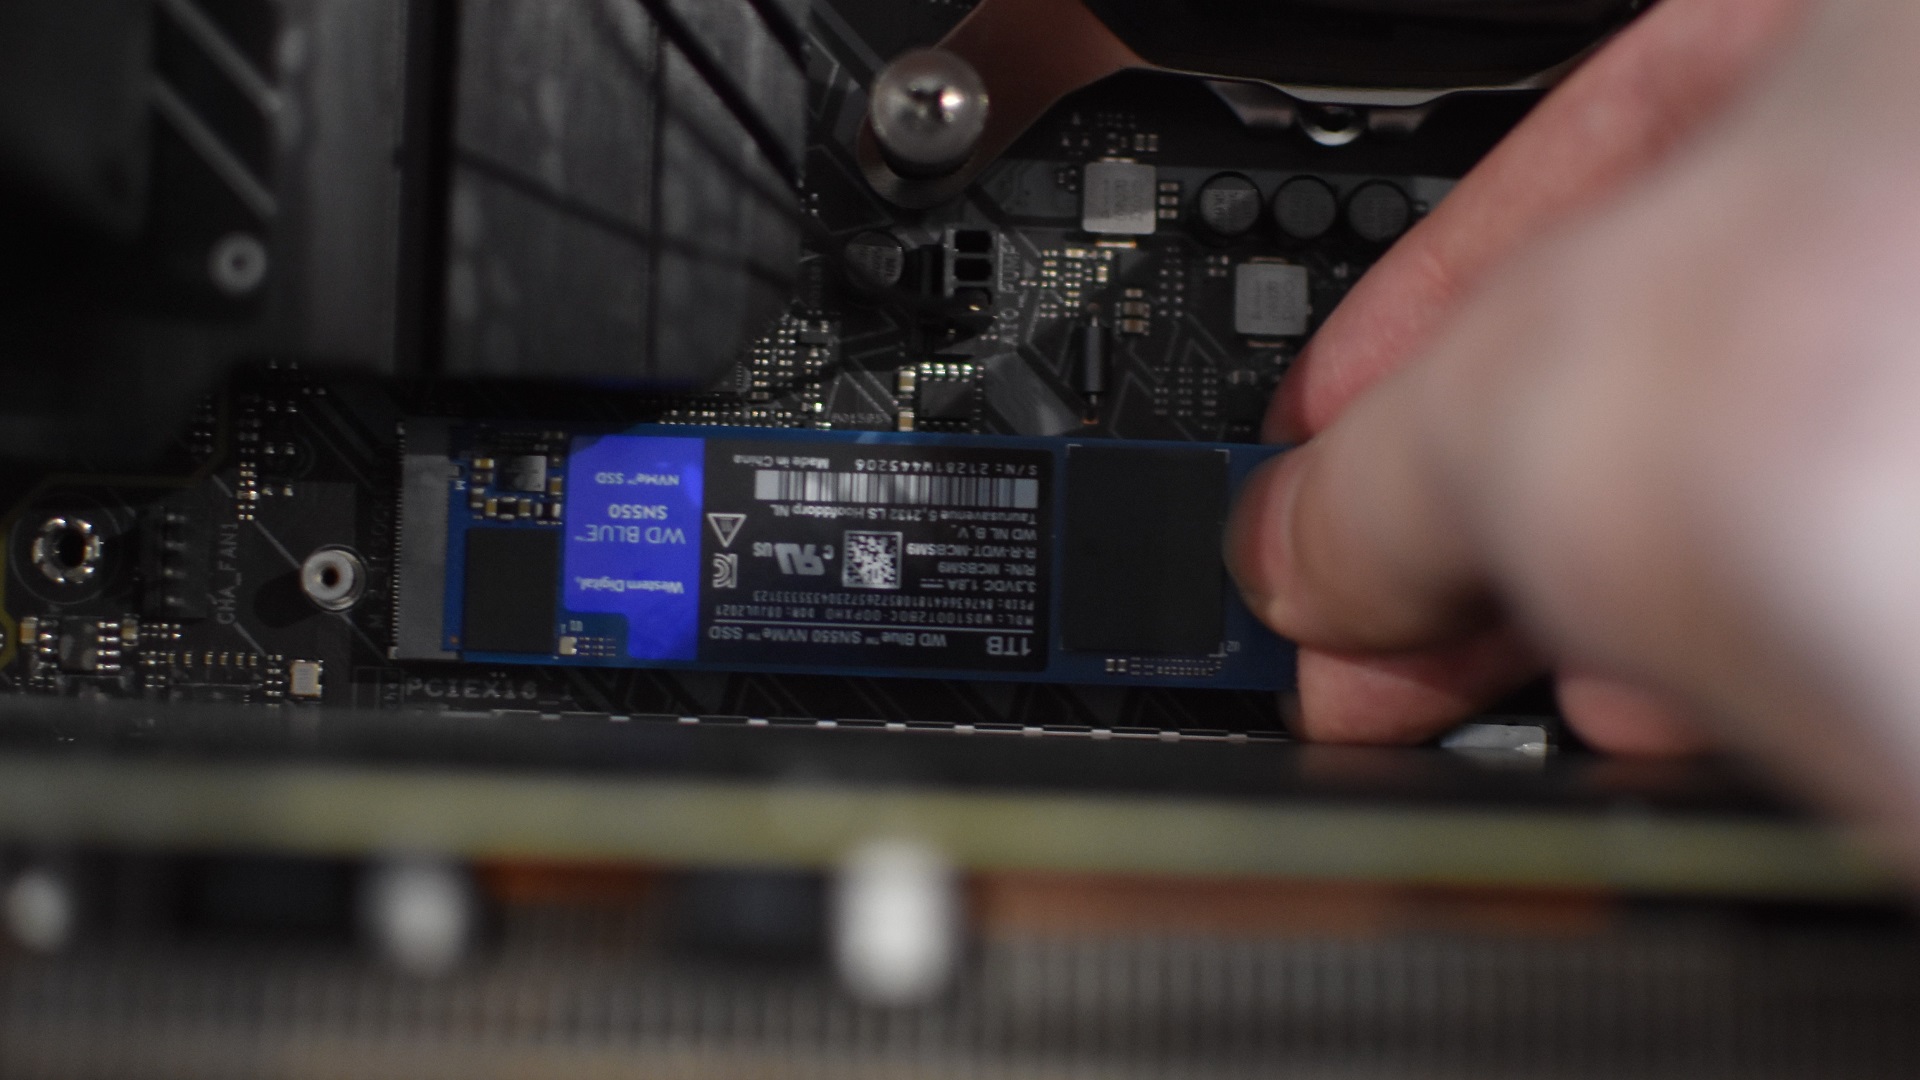 Step 2 of how to install an NVMe SSD: Insert the SSD sideways into the M.2 slot.